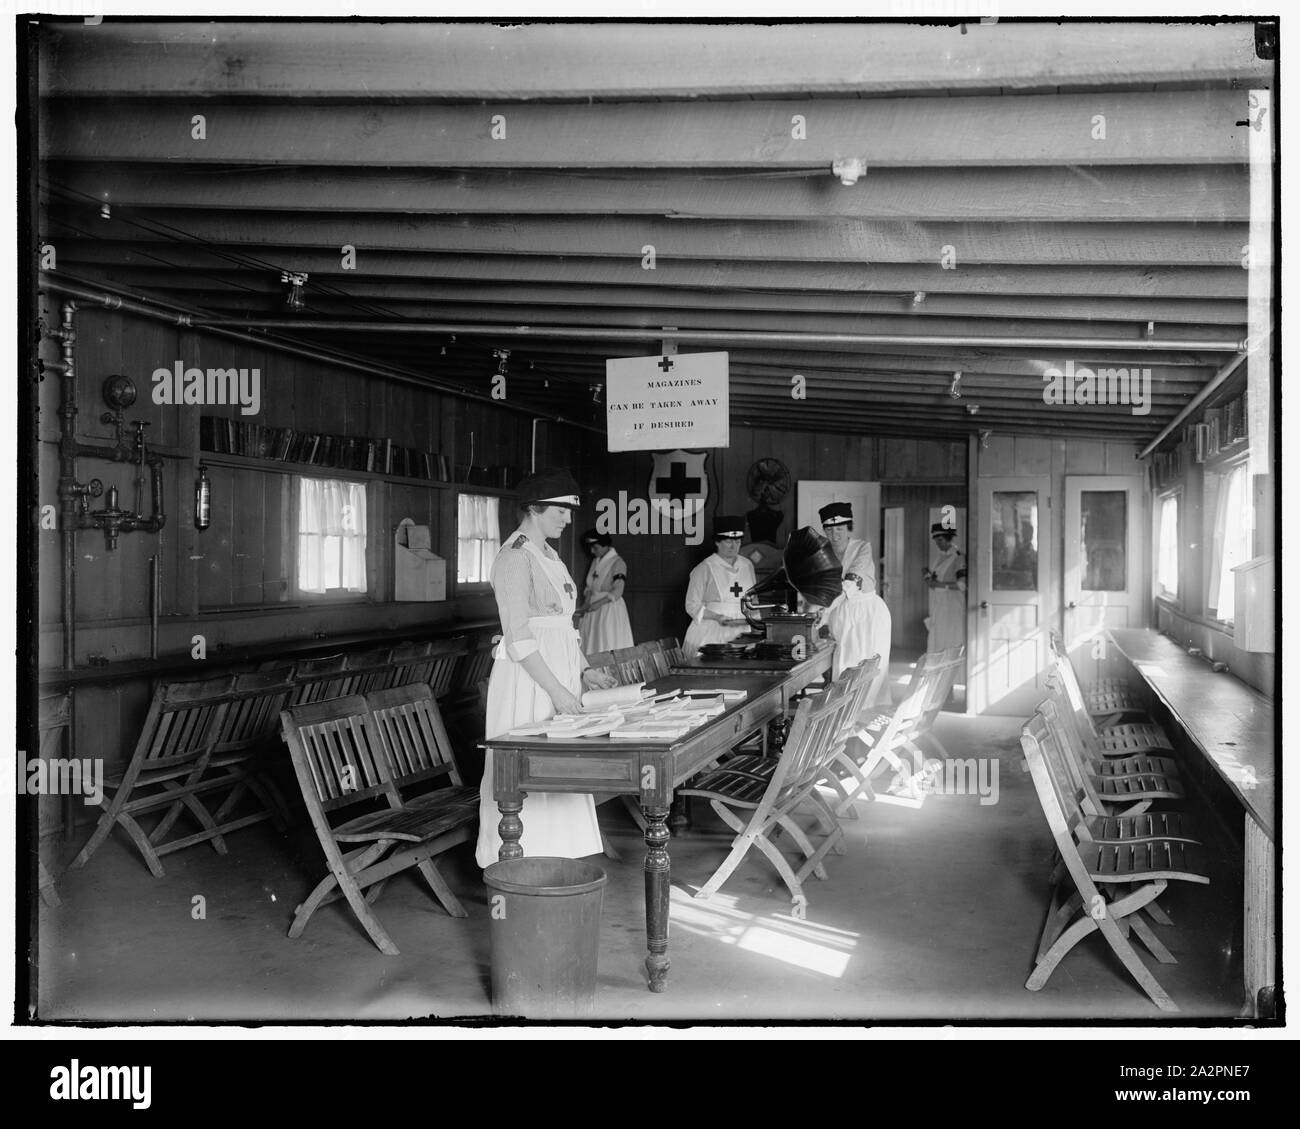 RED CROSS. CANTEEN Stock Photo - Alamy